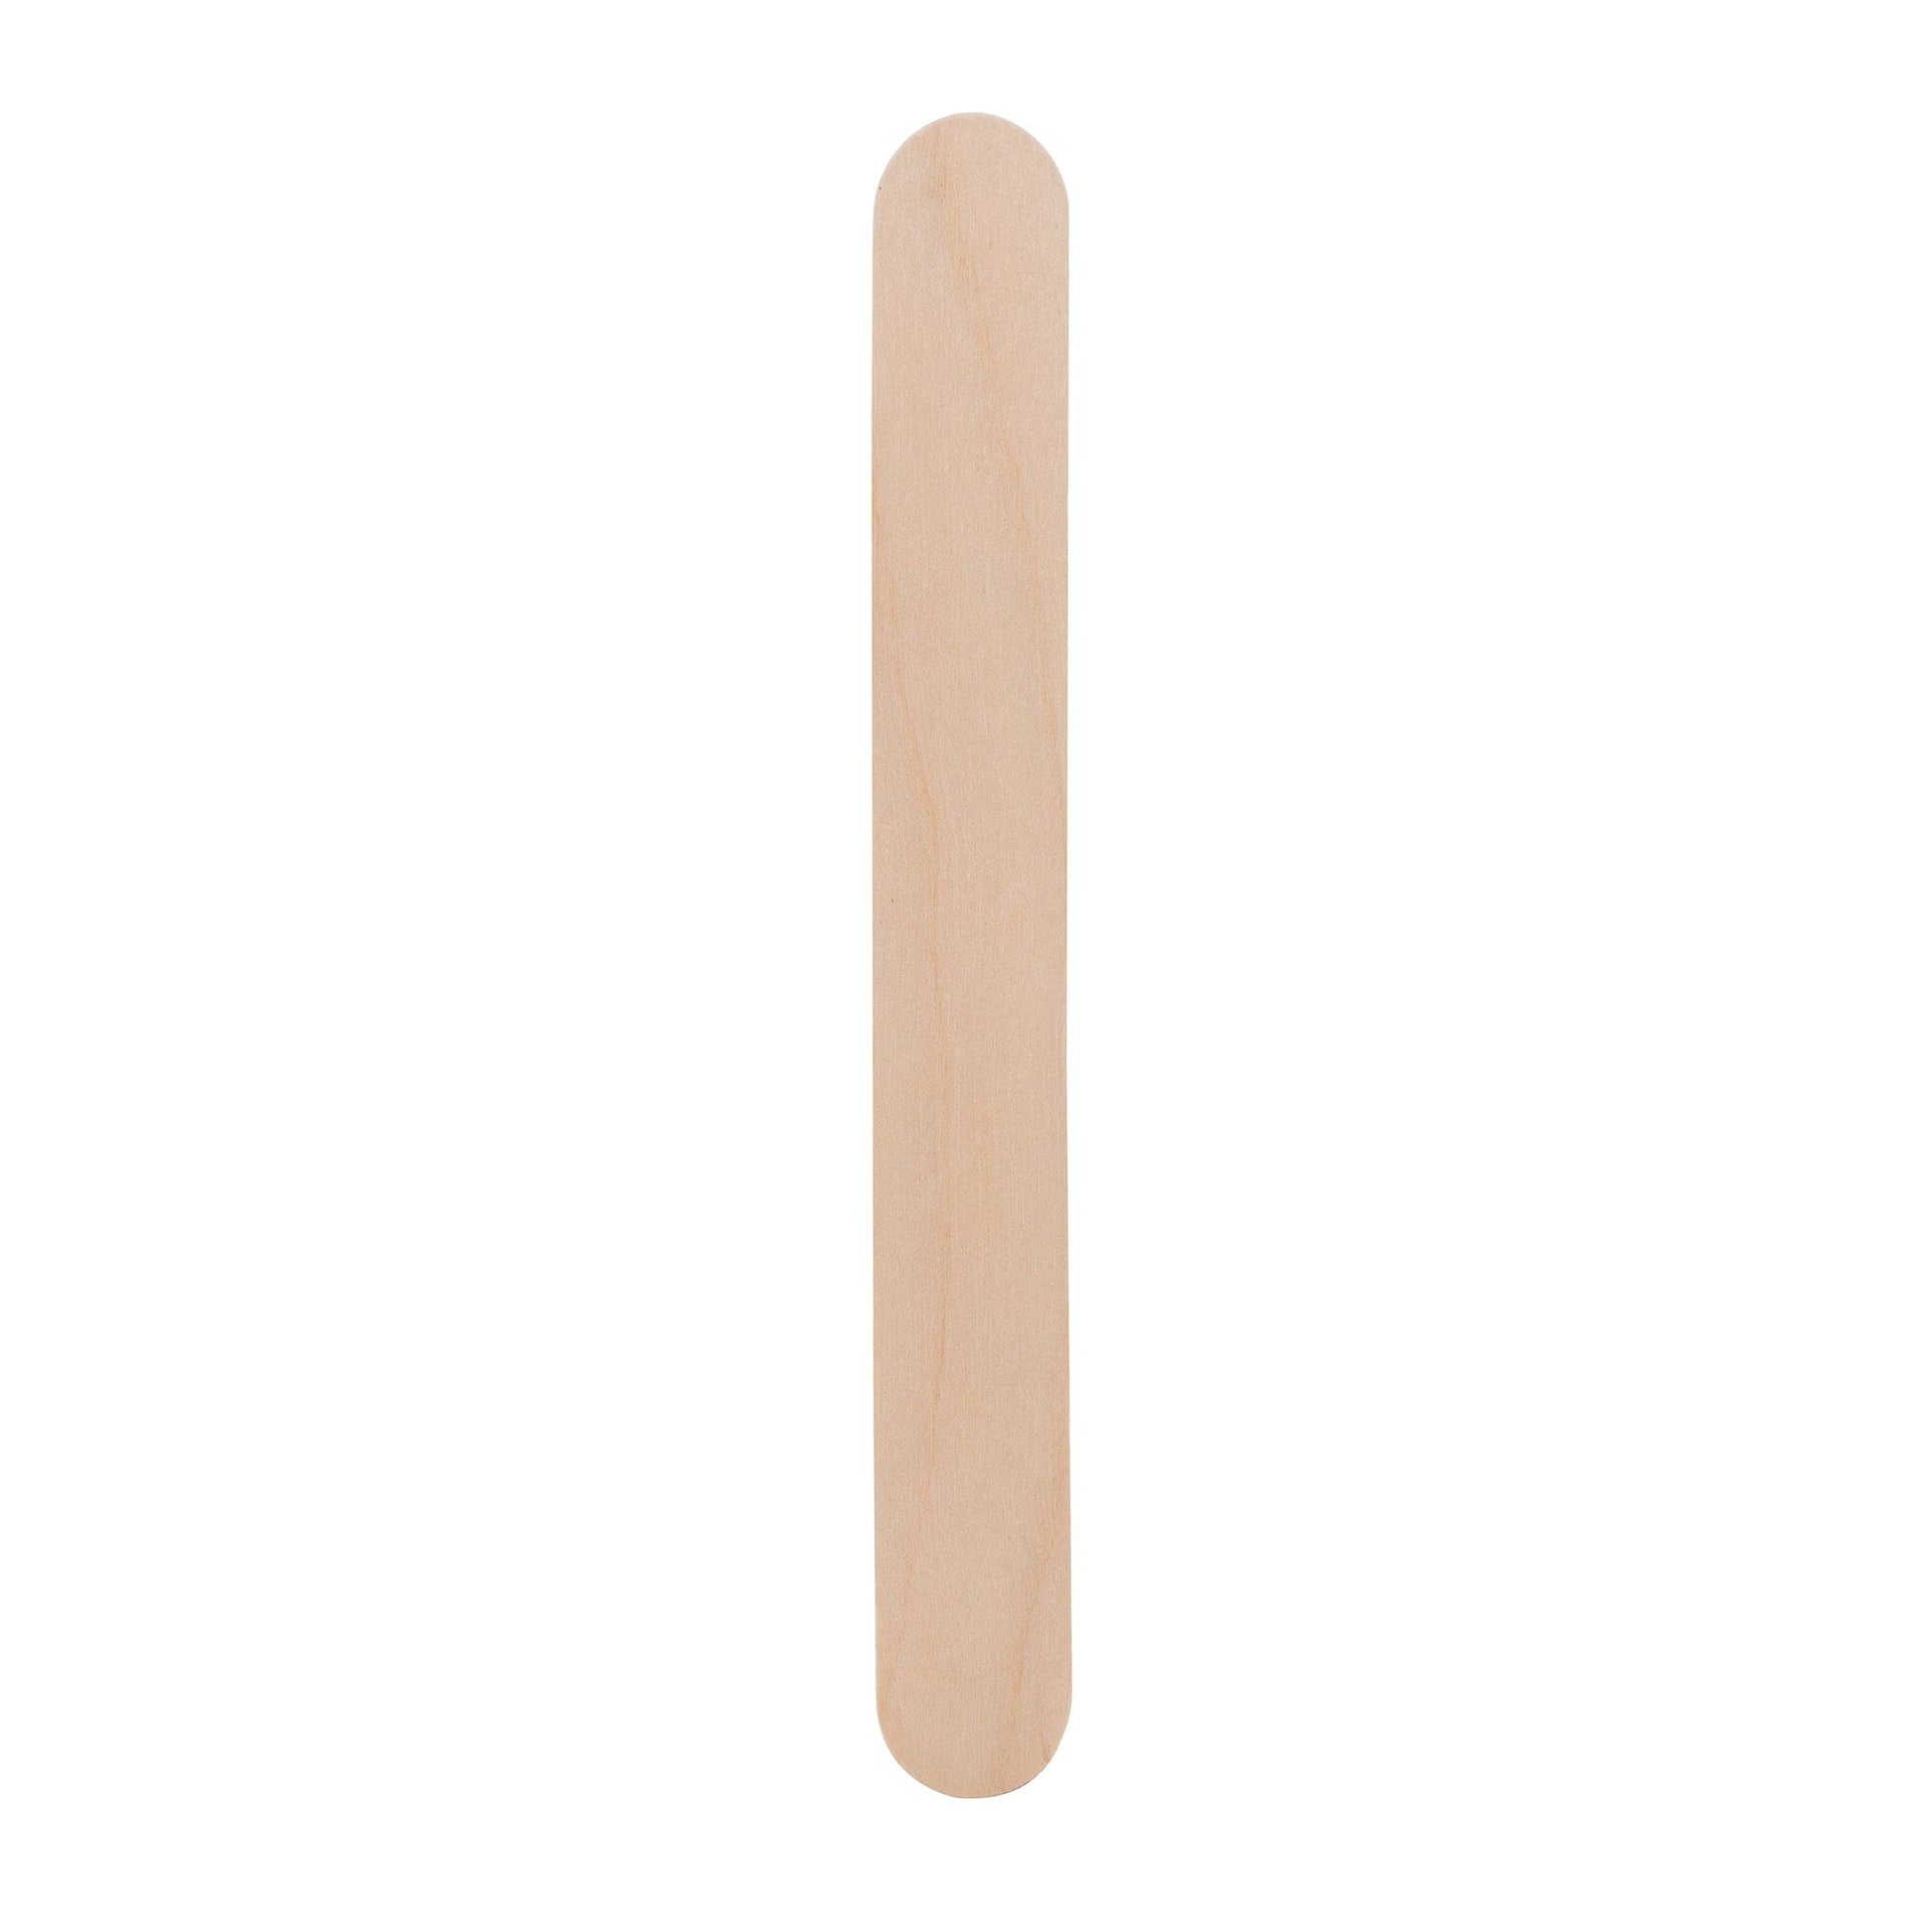 Wooden Wax Applicator for Body and Face - Large